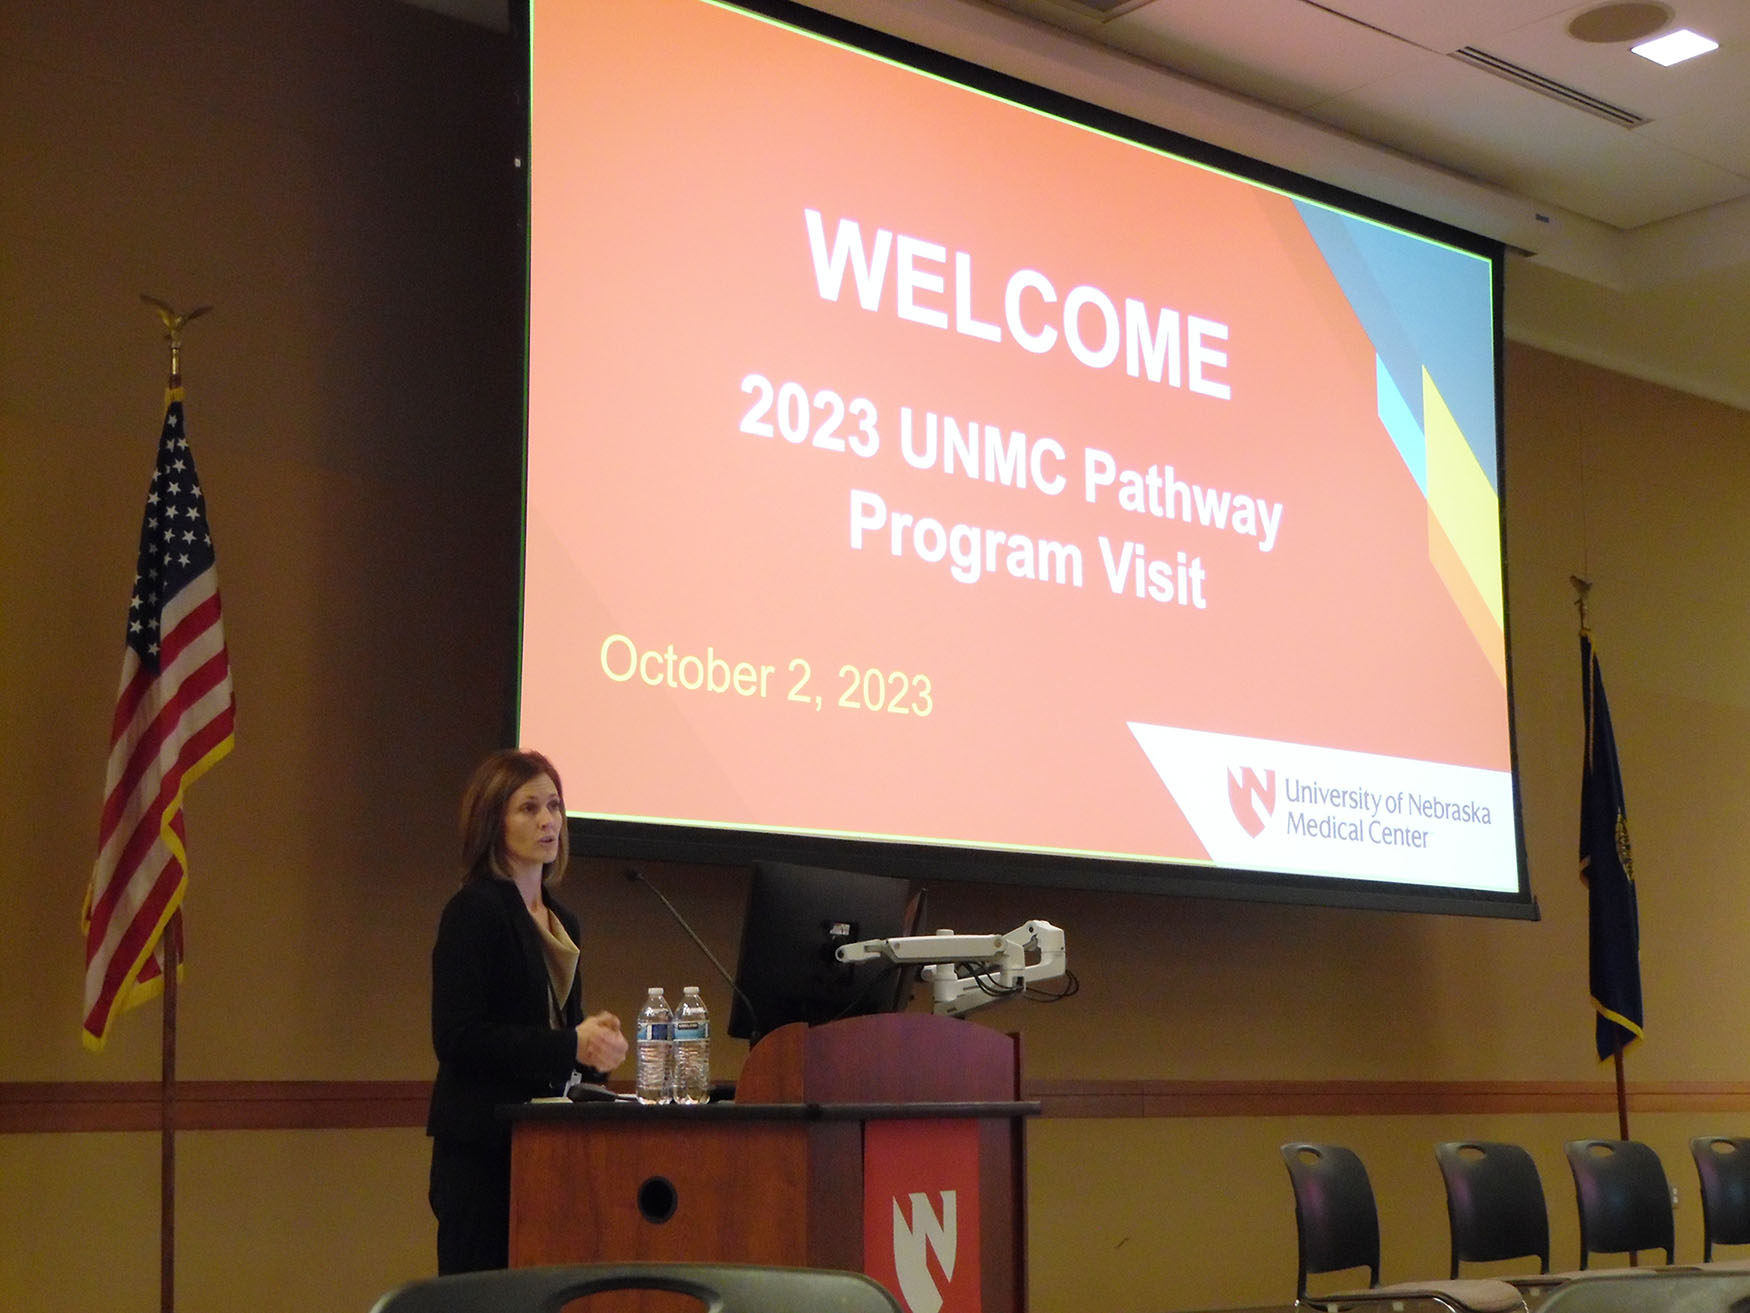 Nikki Carritt&comma; assistant vice chancellor for health workforce education relations and director of Rural Health Initiatives&comma; told the UNMC pathway students that they are needed as health care professionals to fill the state&apos;s workforce shortages across health care disciplines&period;